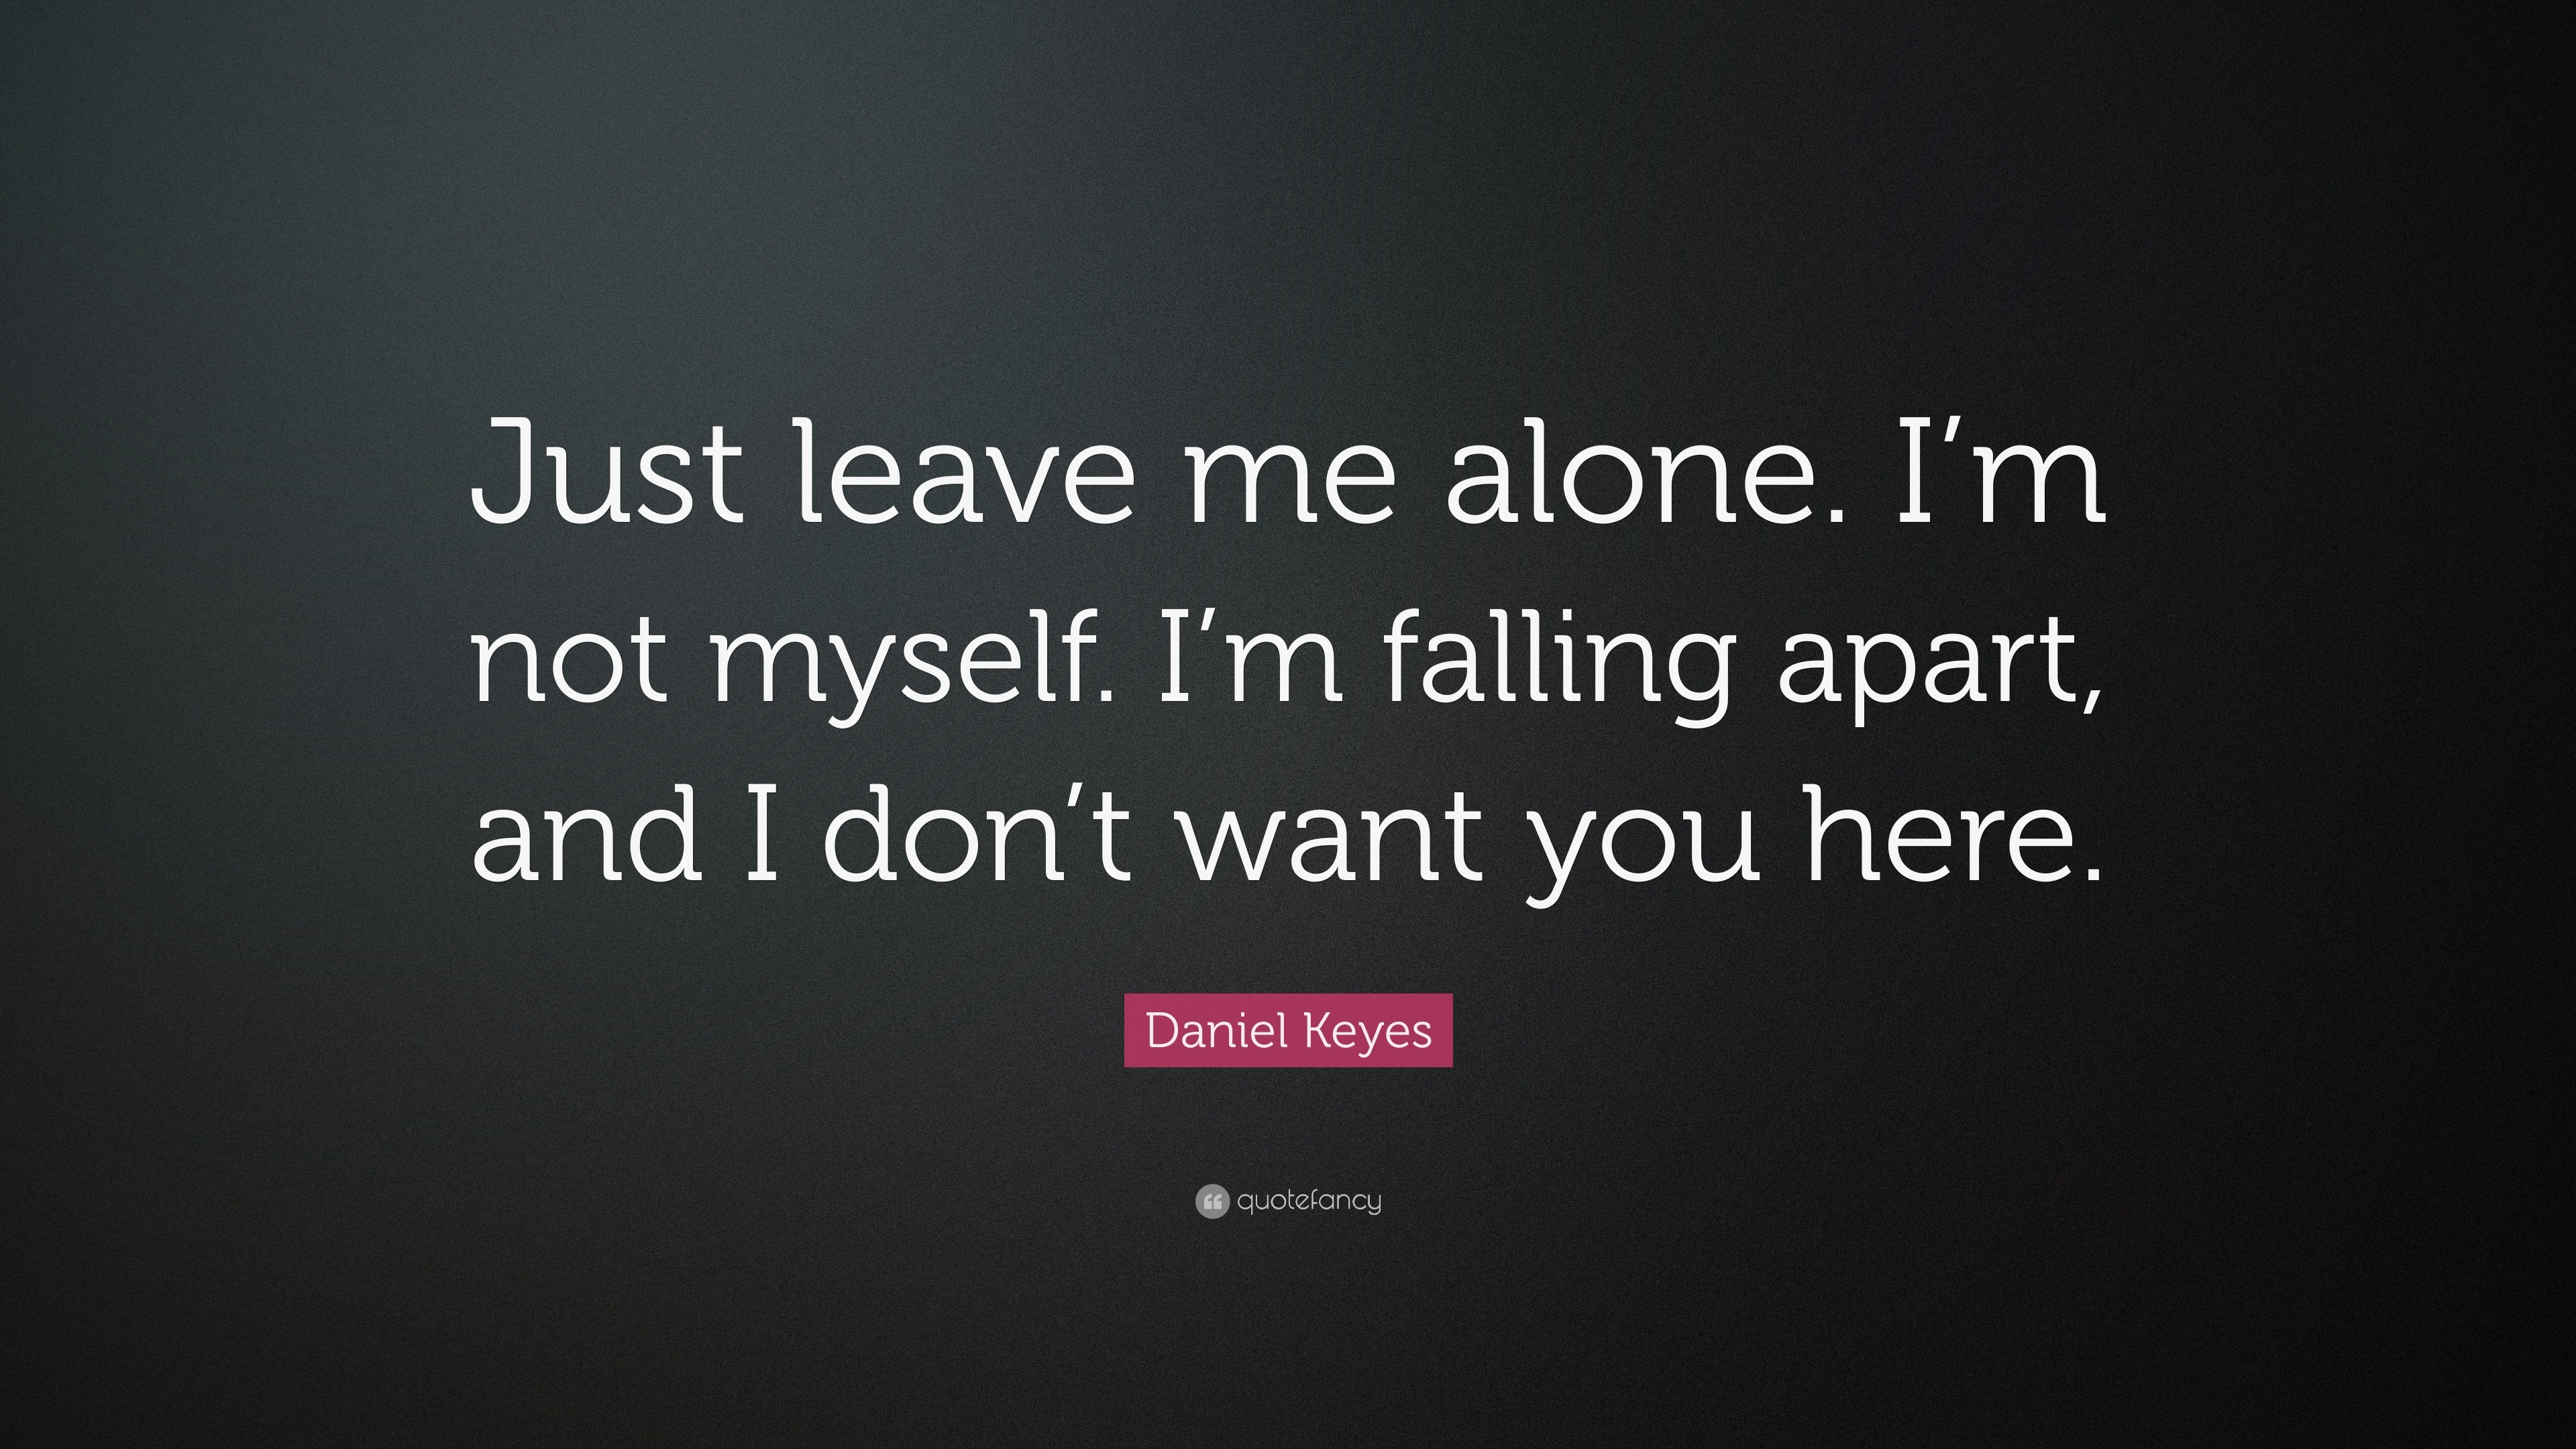 Daniel Keyes Quote: “Just leave me alone. I'm not myself. I'm falling  apart, and